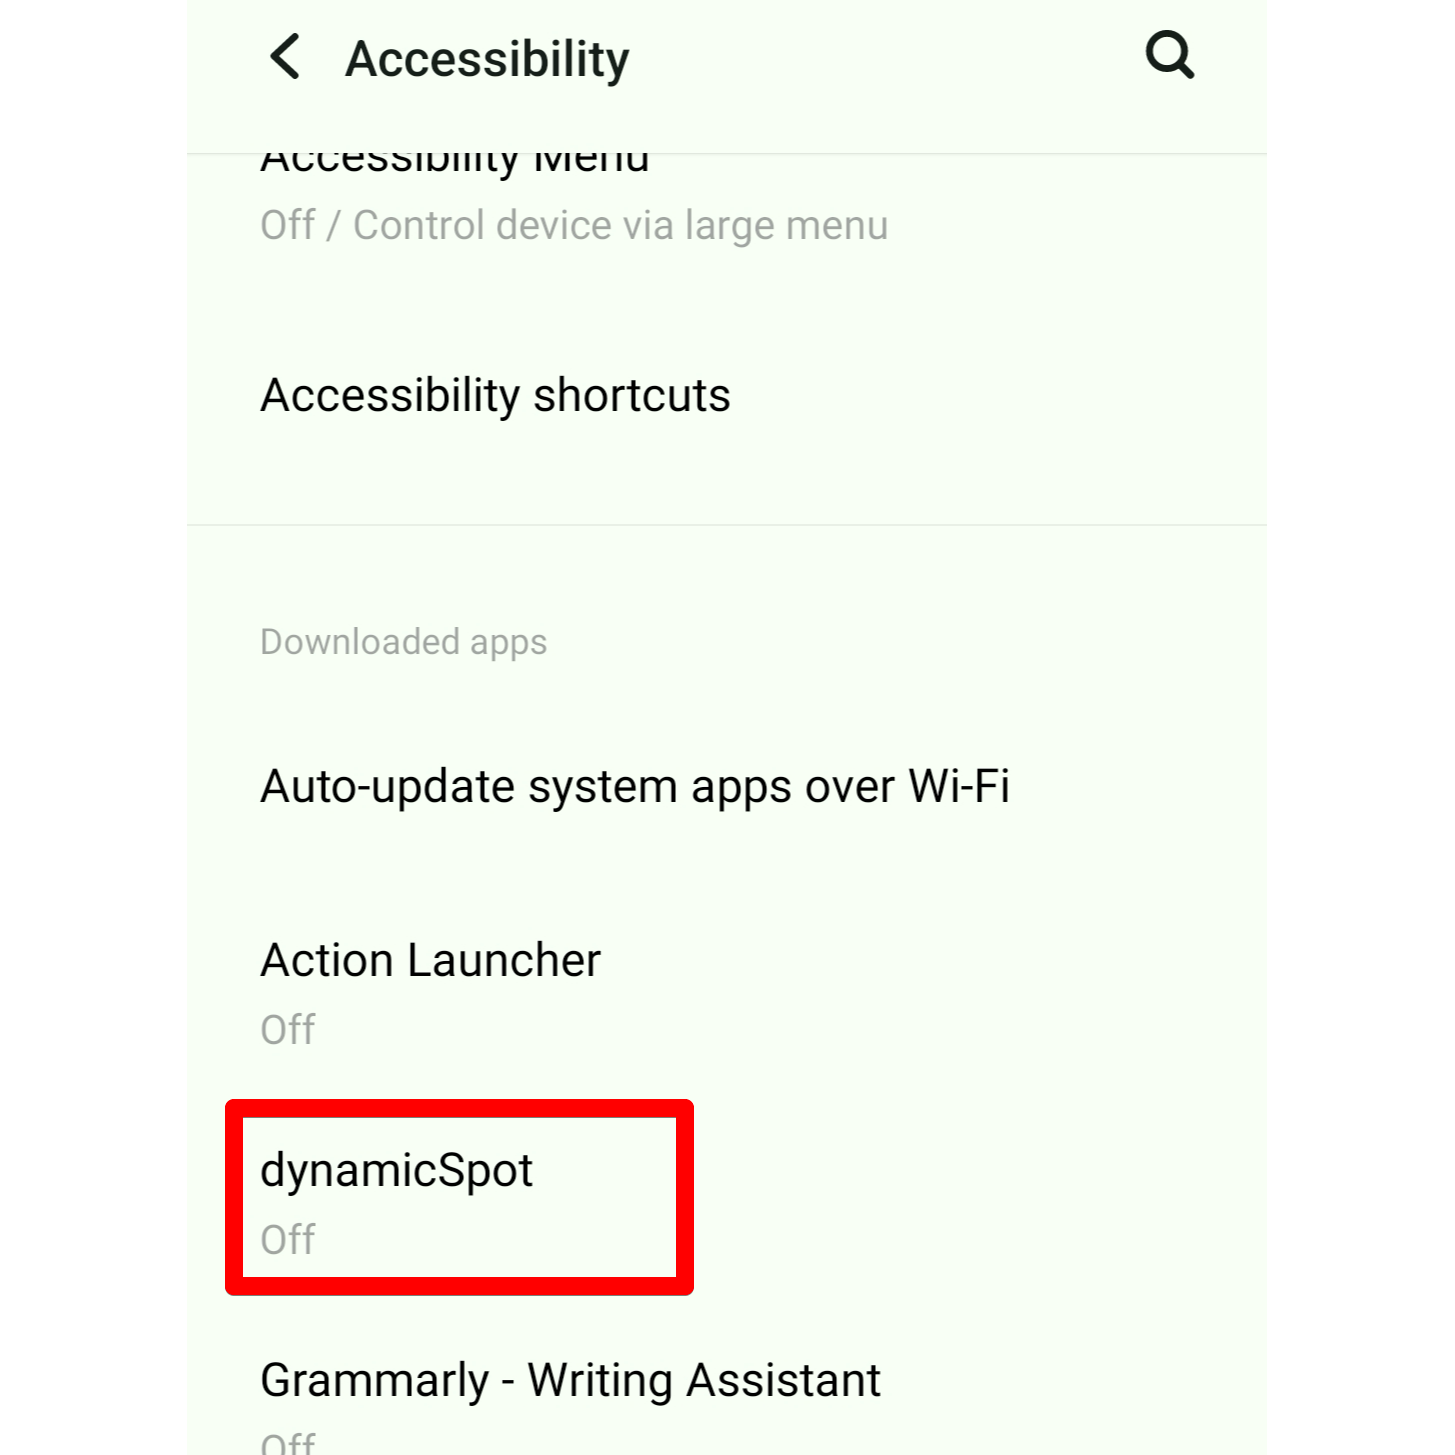 Android's Accessbility menu is open with the dynamicSpot app highlighted. The app needs this permission to display its floating pill.